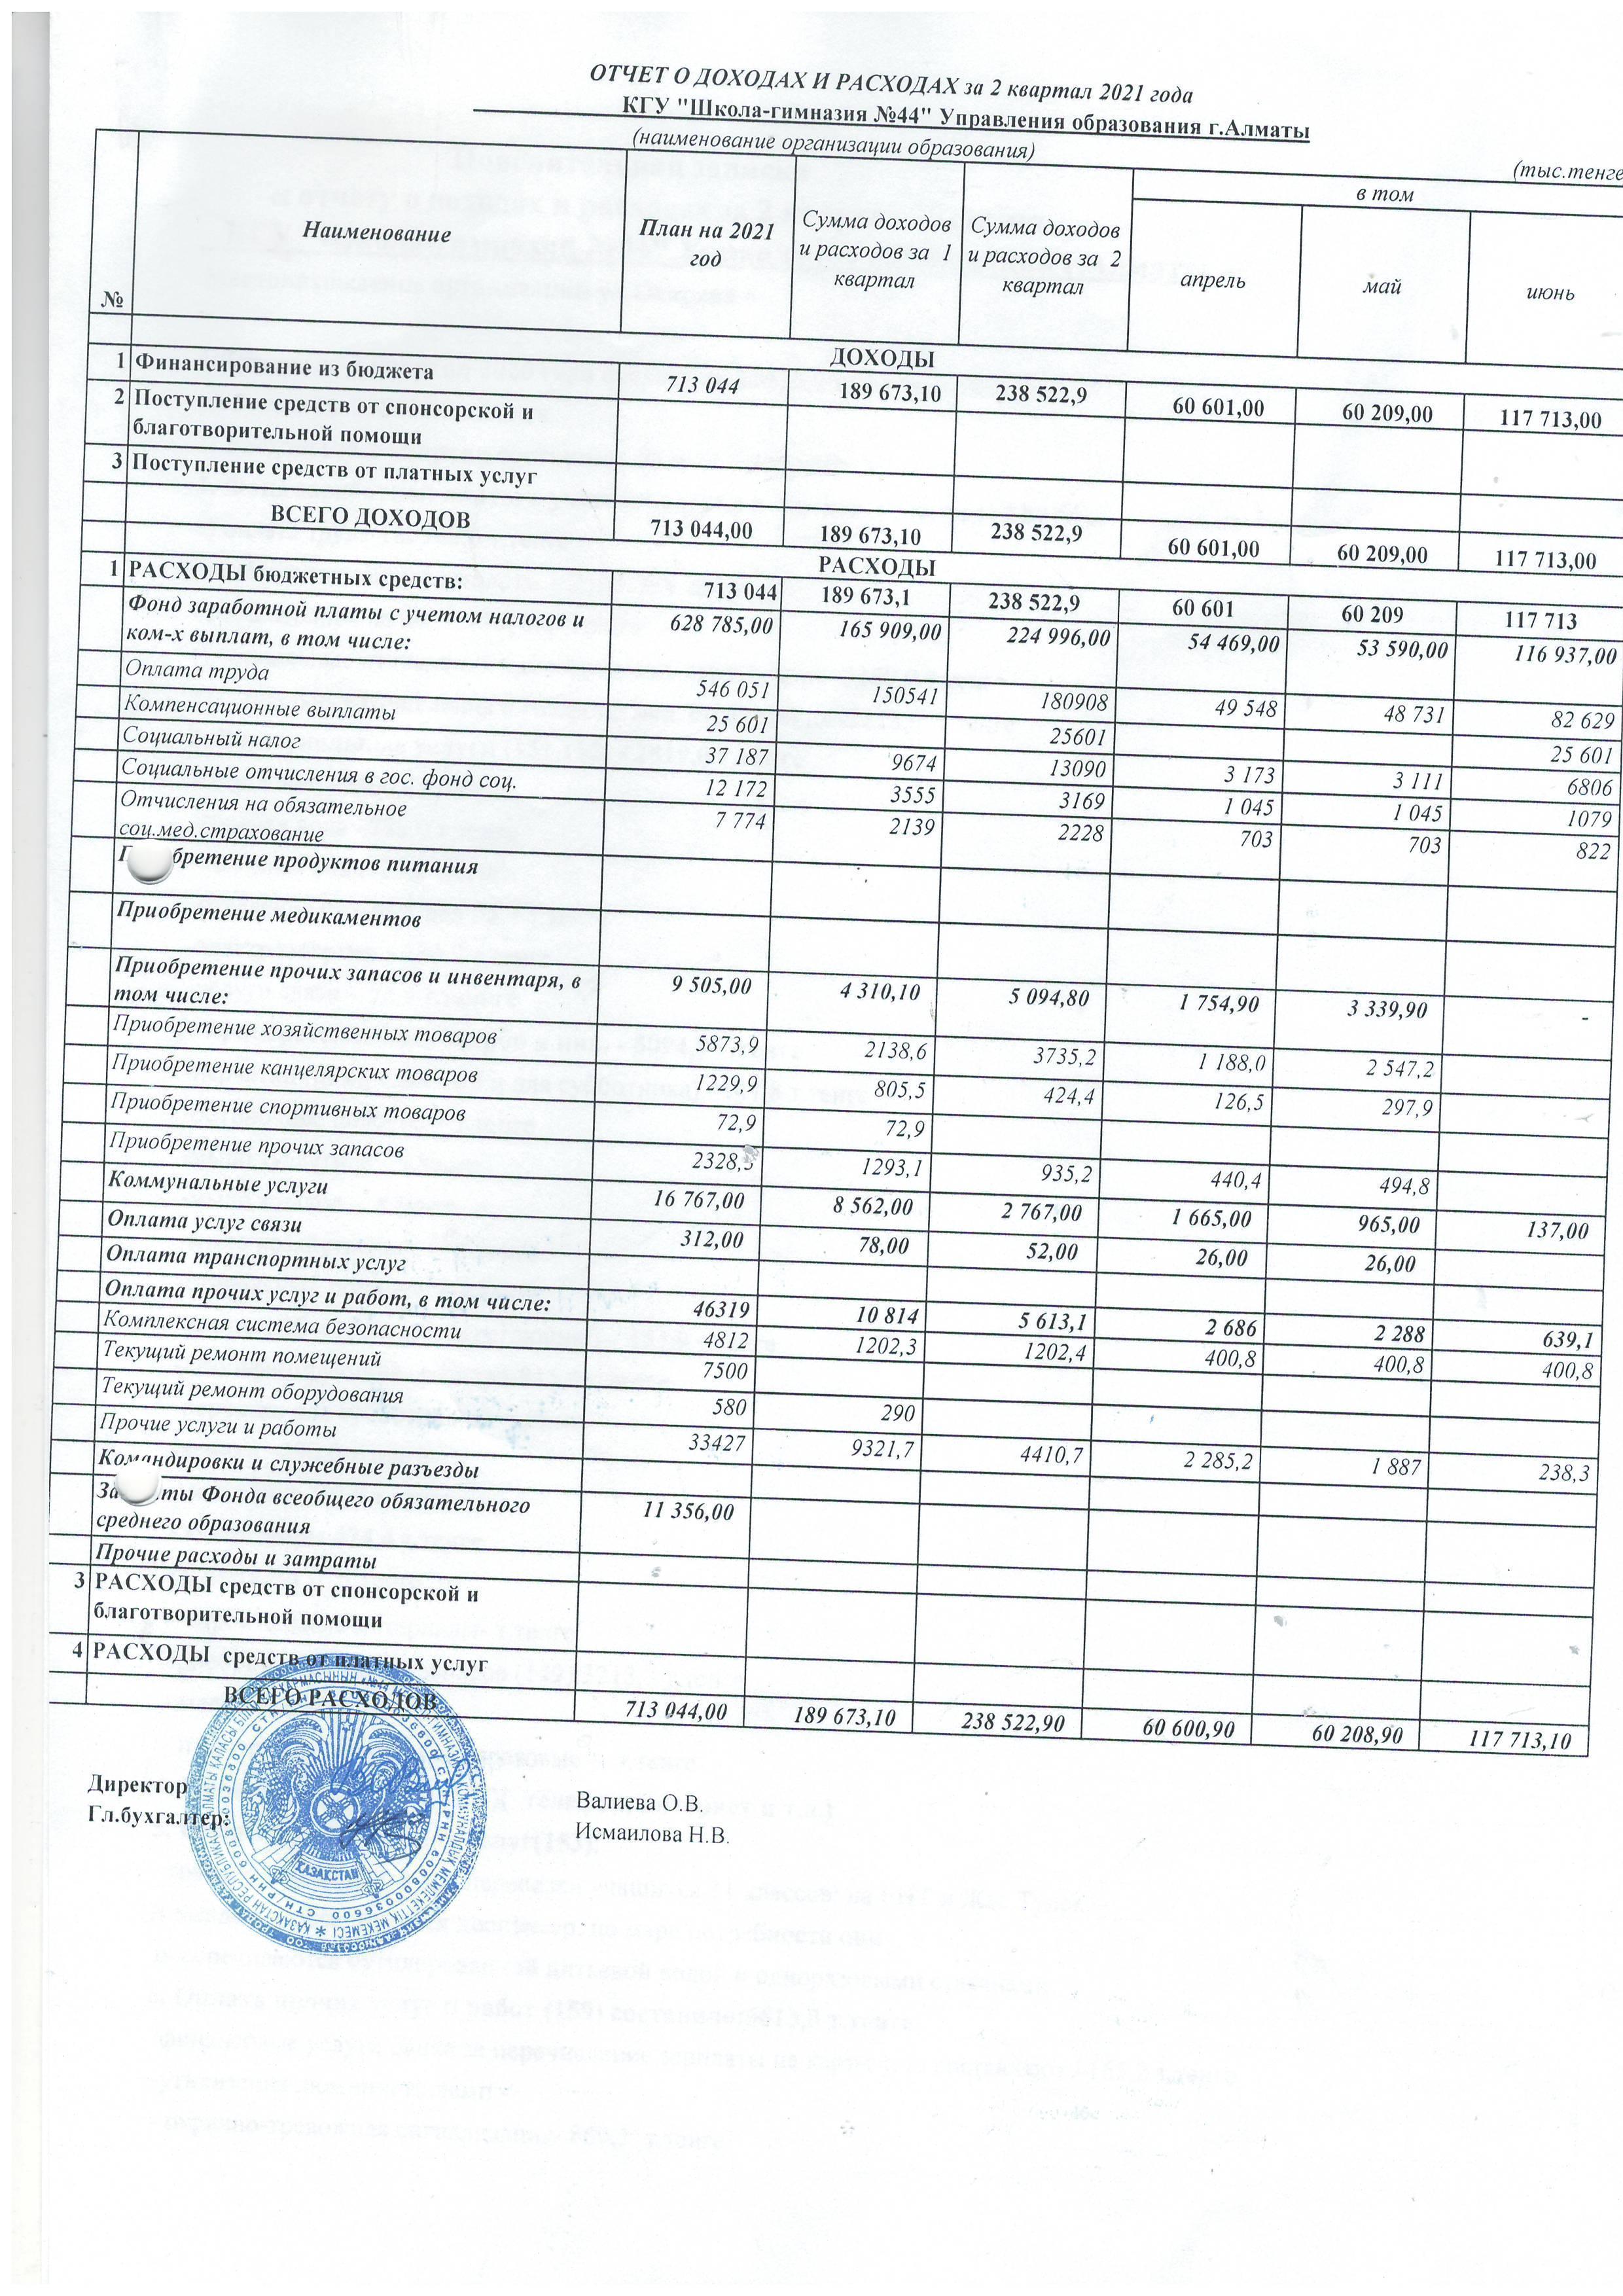 Statement of income and expenses за 2 квартал 2021 года